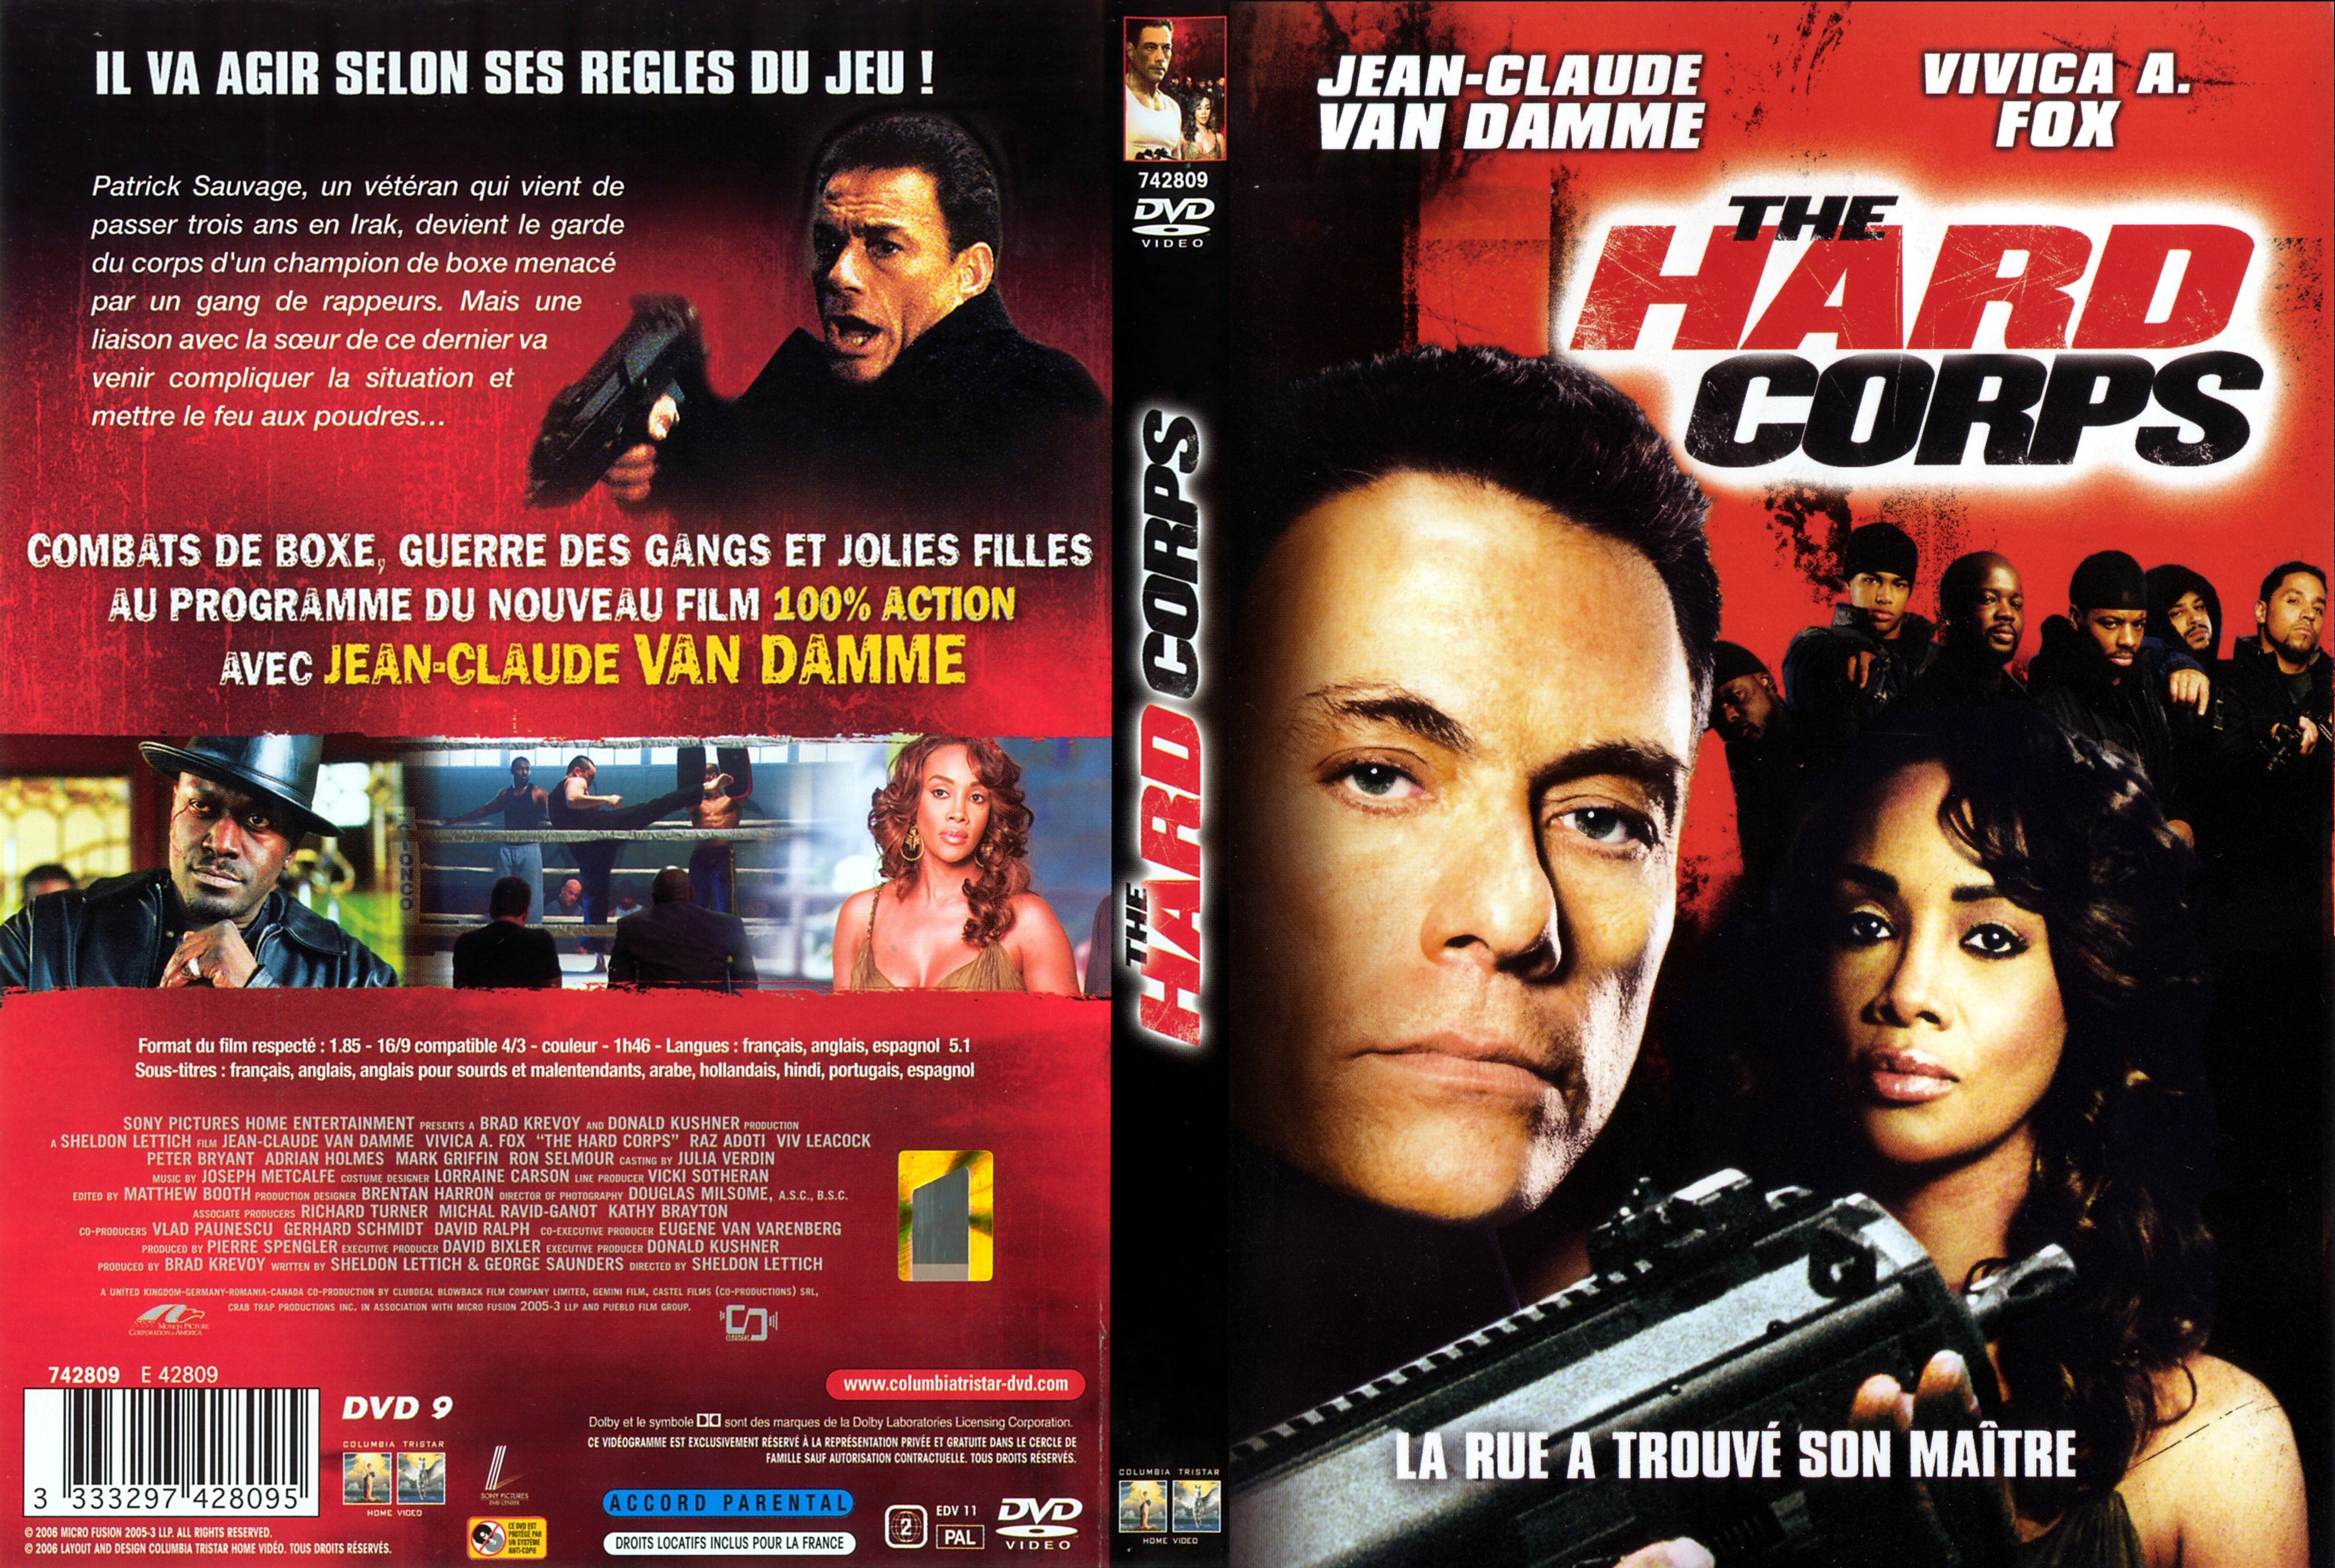 Jaquette DVD The hard corps v2